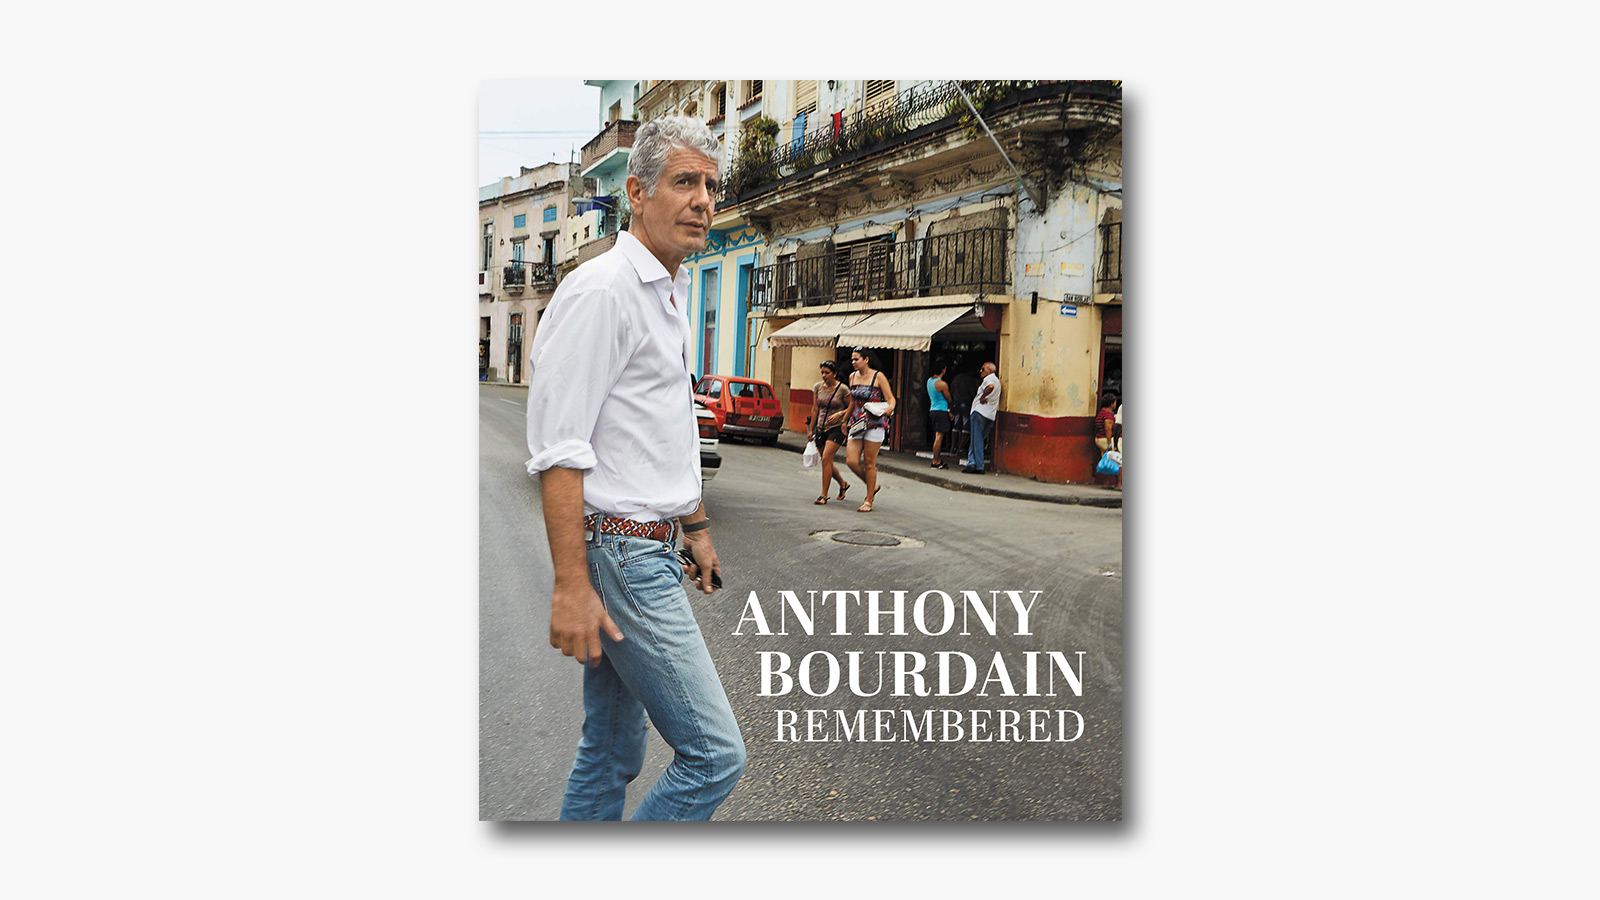 Anthony Bourdain Remembered by CNN